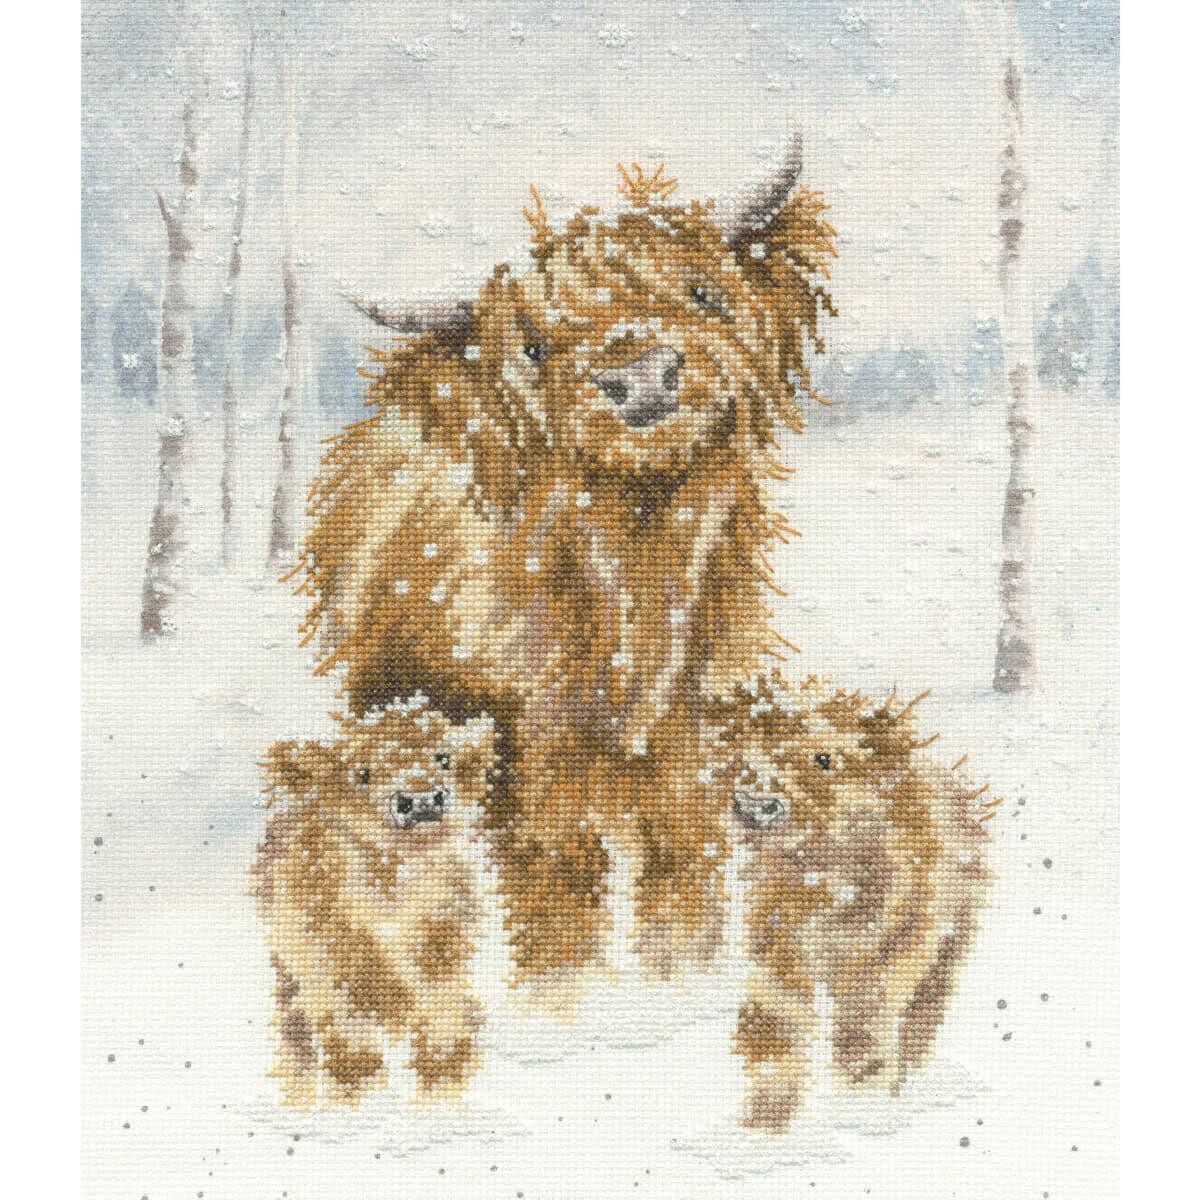 An embroidery pack from Bothy Threads showing a shaggy...